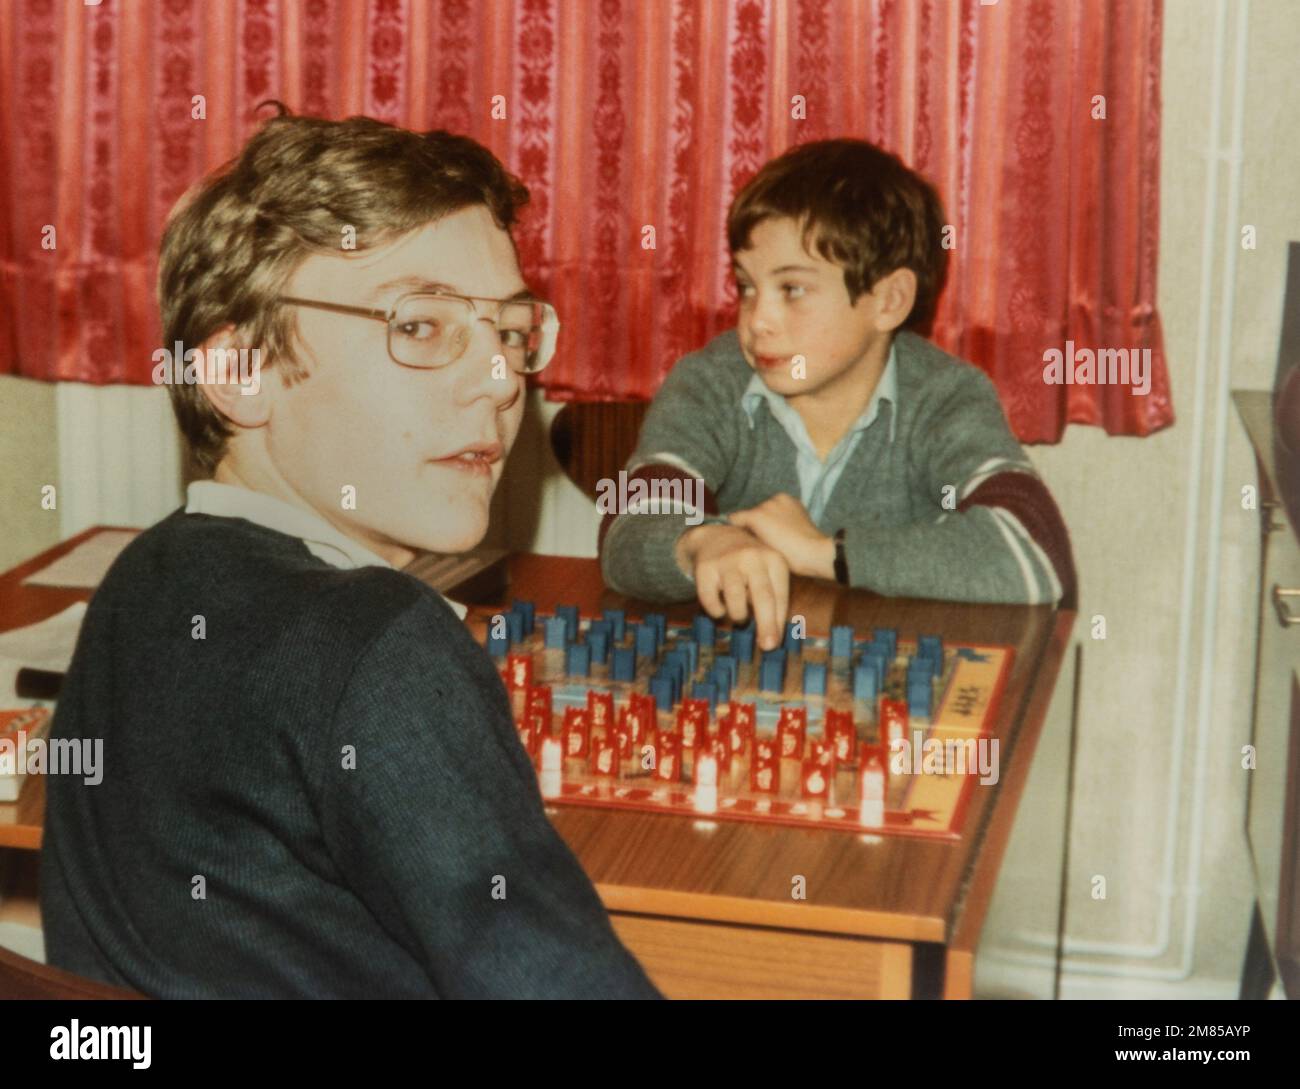 Two boys children kids playing Guess Who board game, archival photo from around 1982, England, UK Stock Photo